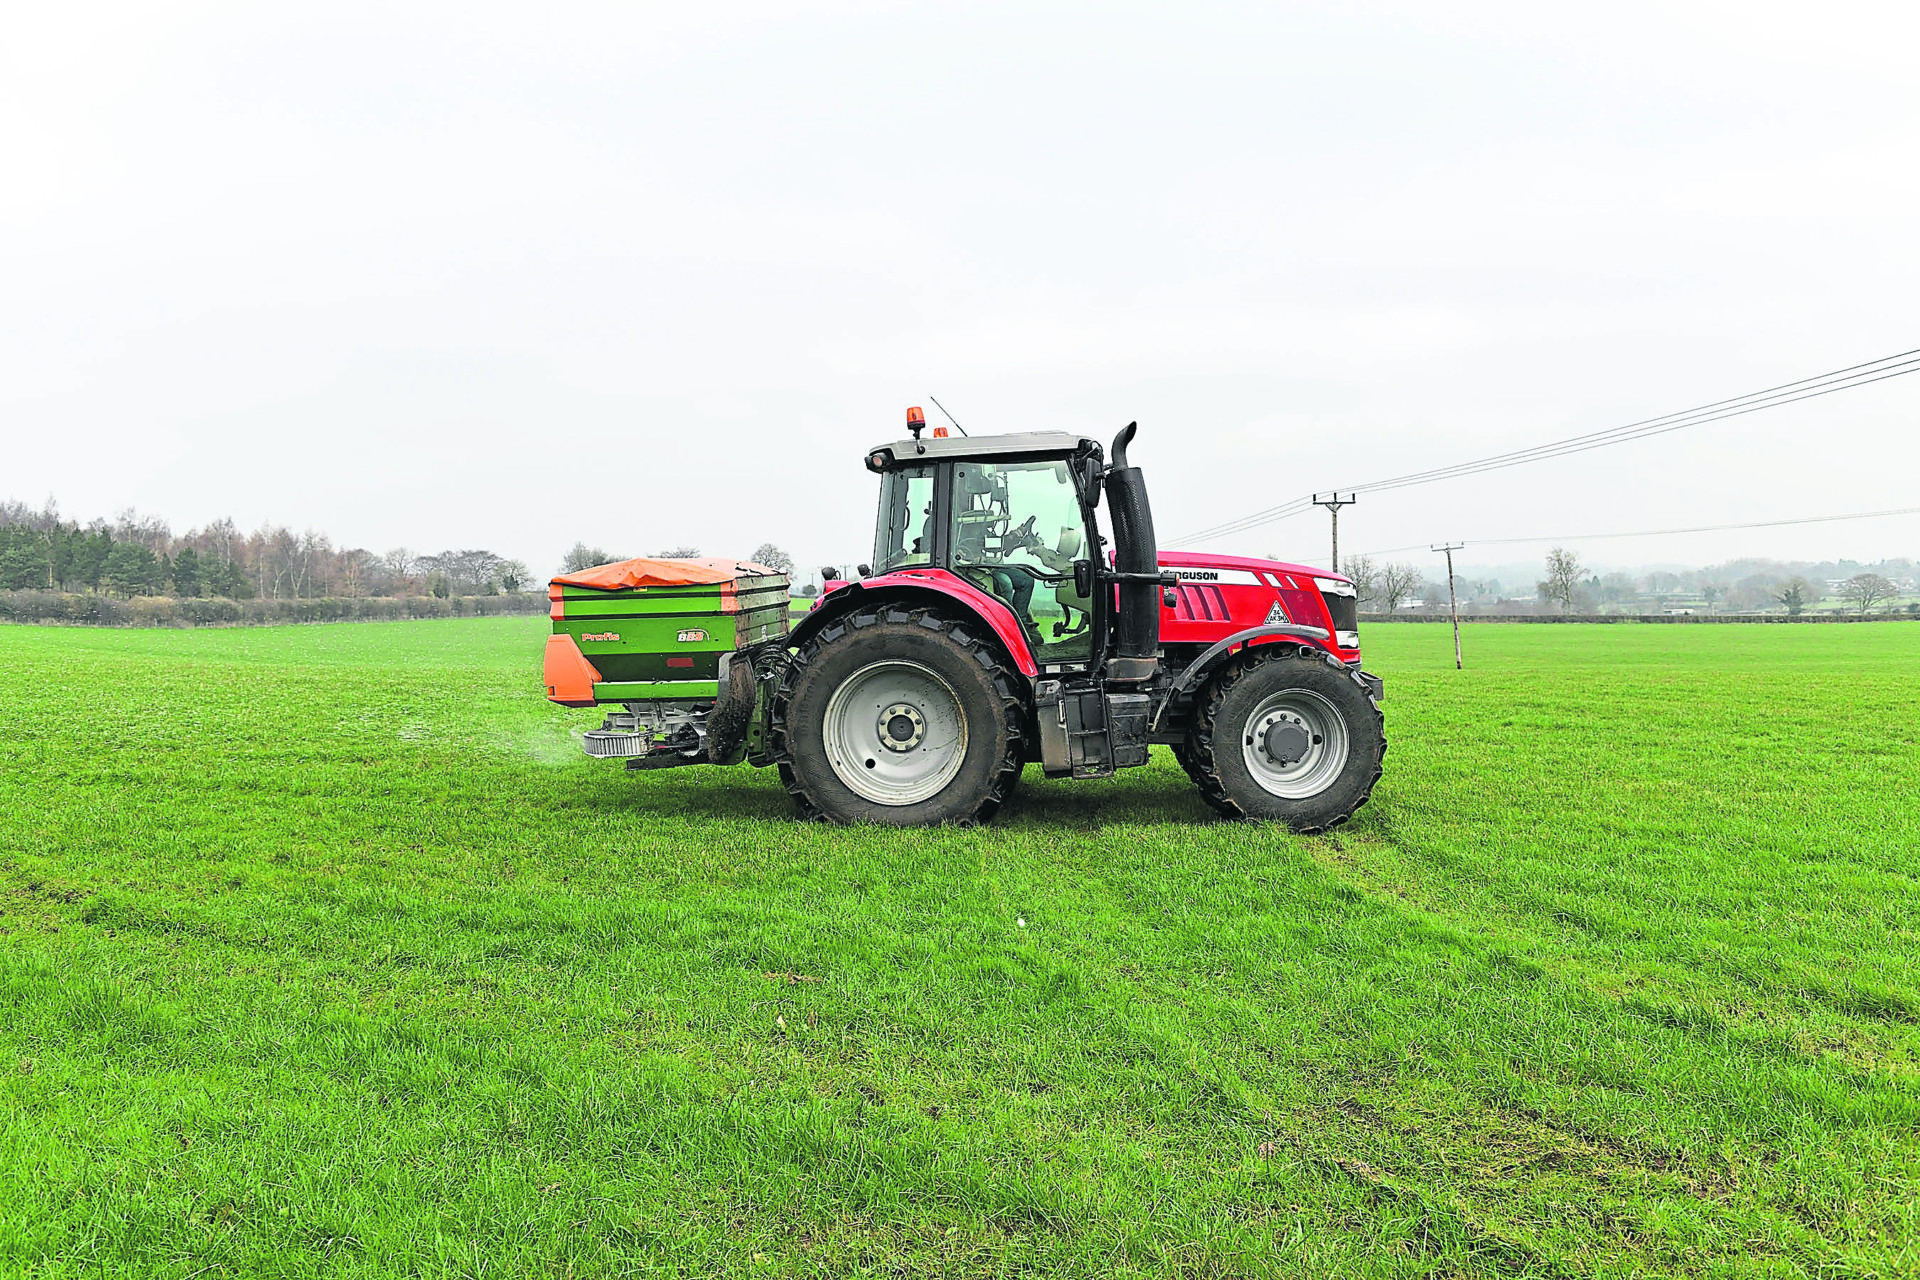 Motorists urged to be ‘patient with tractors’